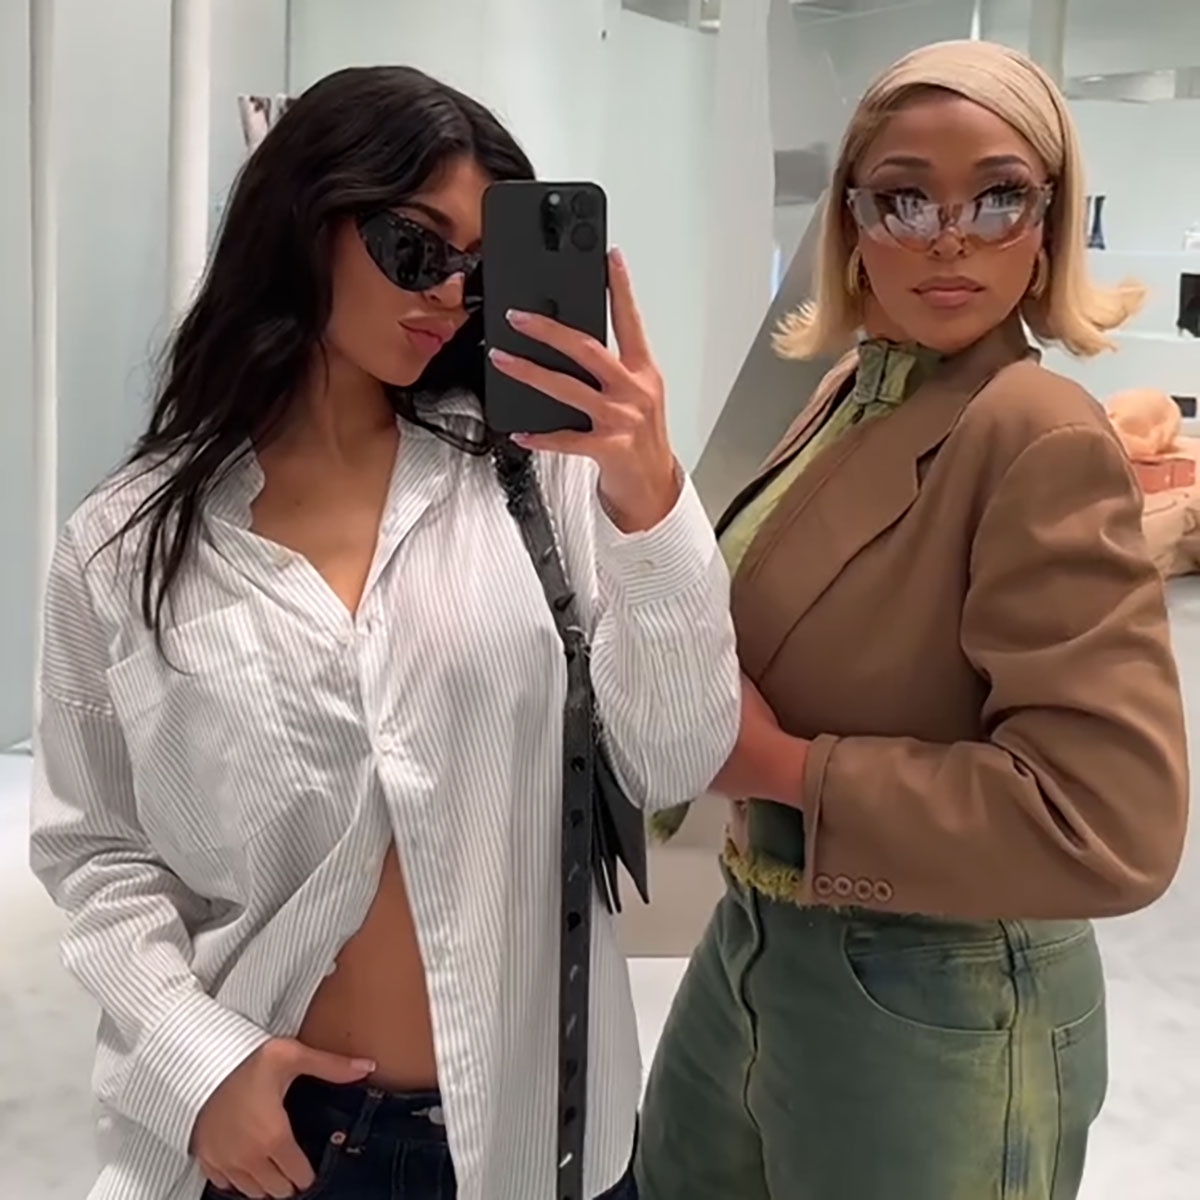 Kylie Jenner and Jordyn Woods Reunite 4 Years After Falling-Out